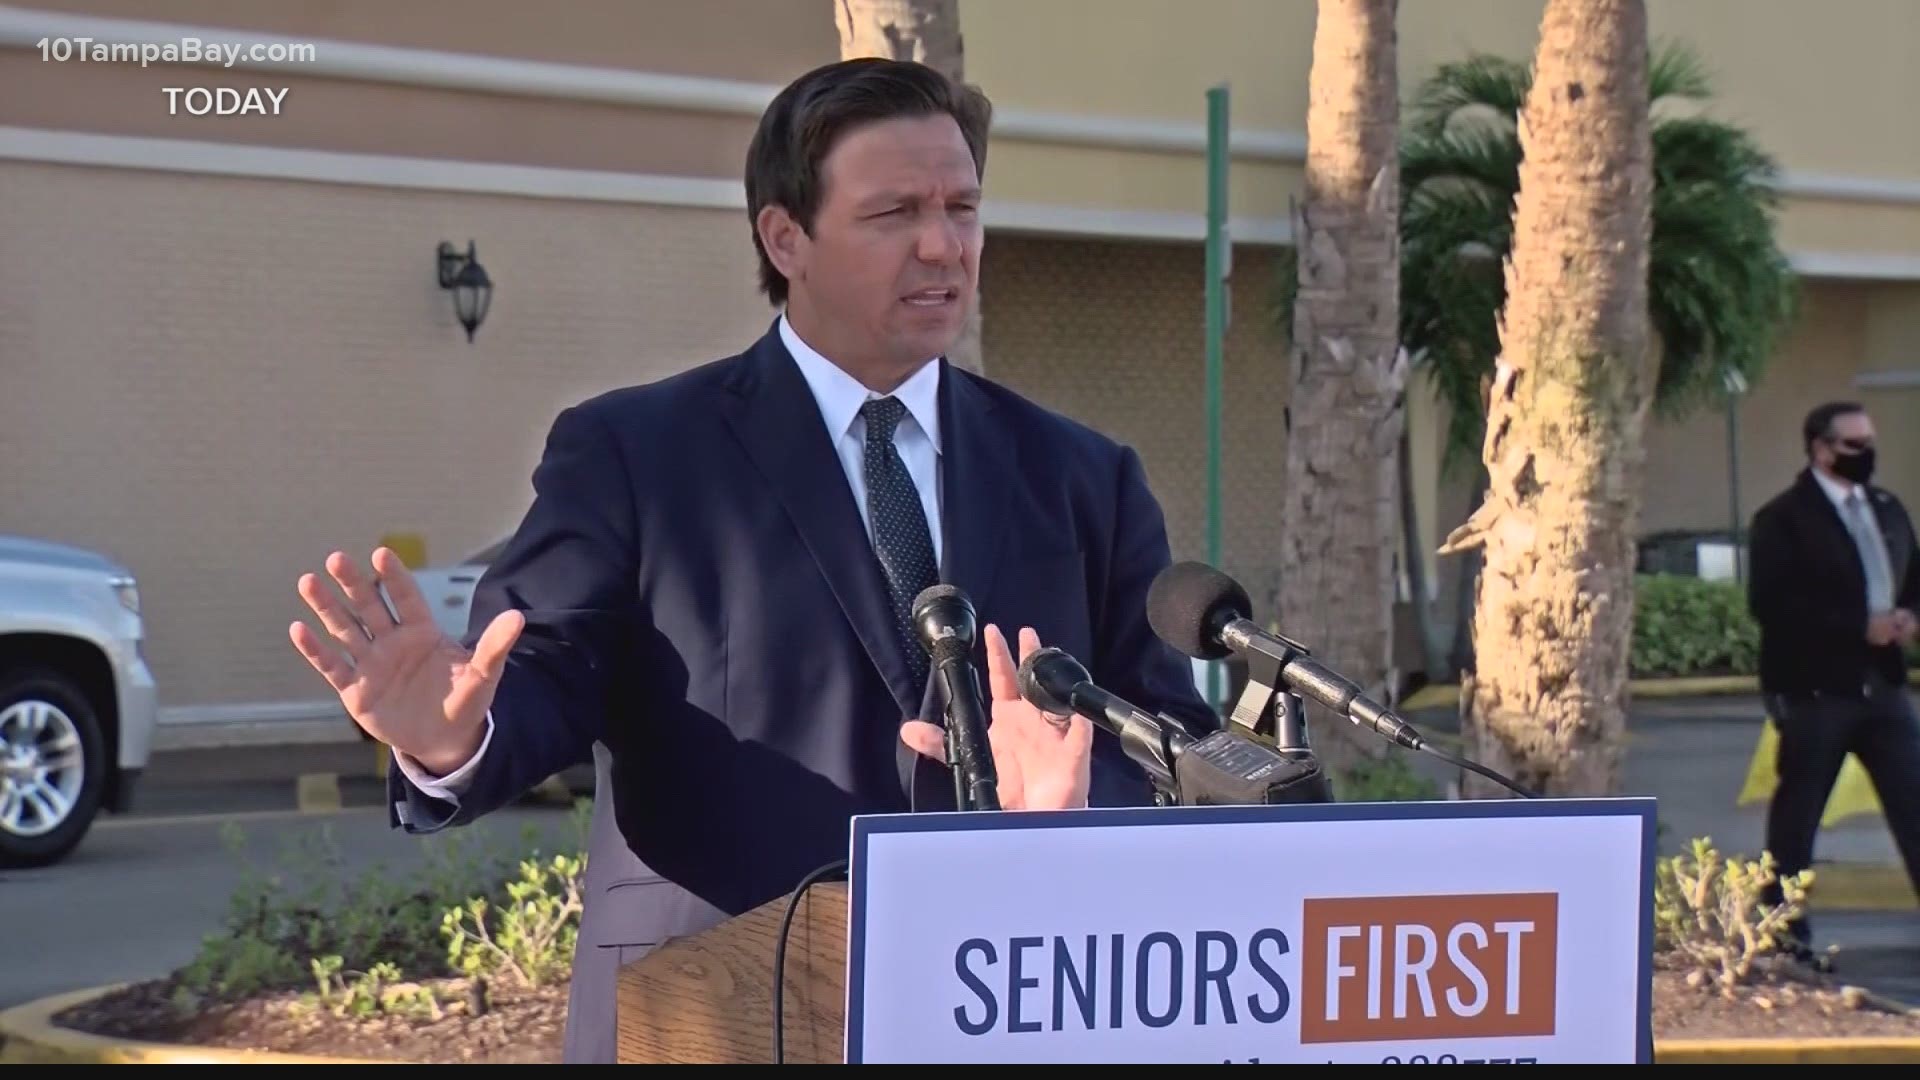 It's a reversal for Gov. DeSantis, who explained why the state has only used about half of the COVID vaccines it has received.